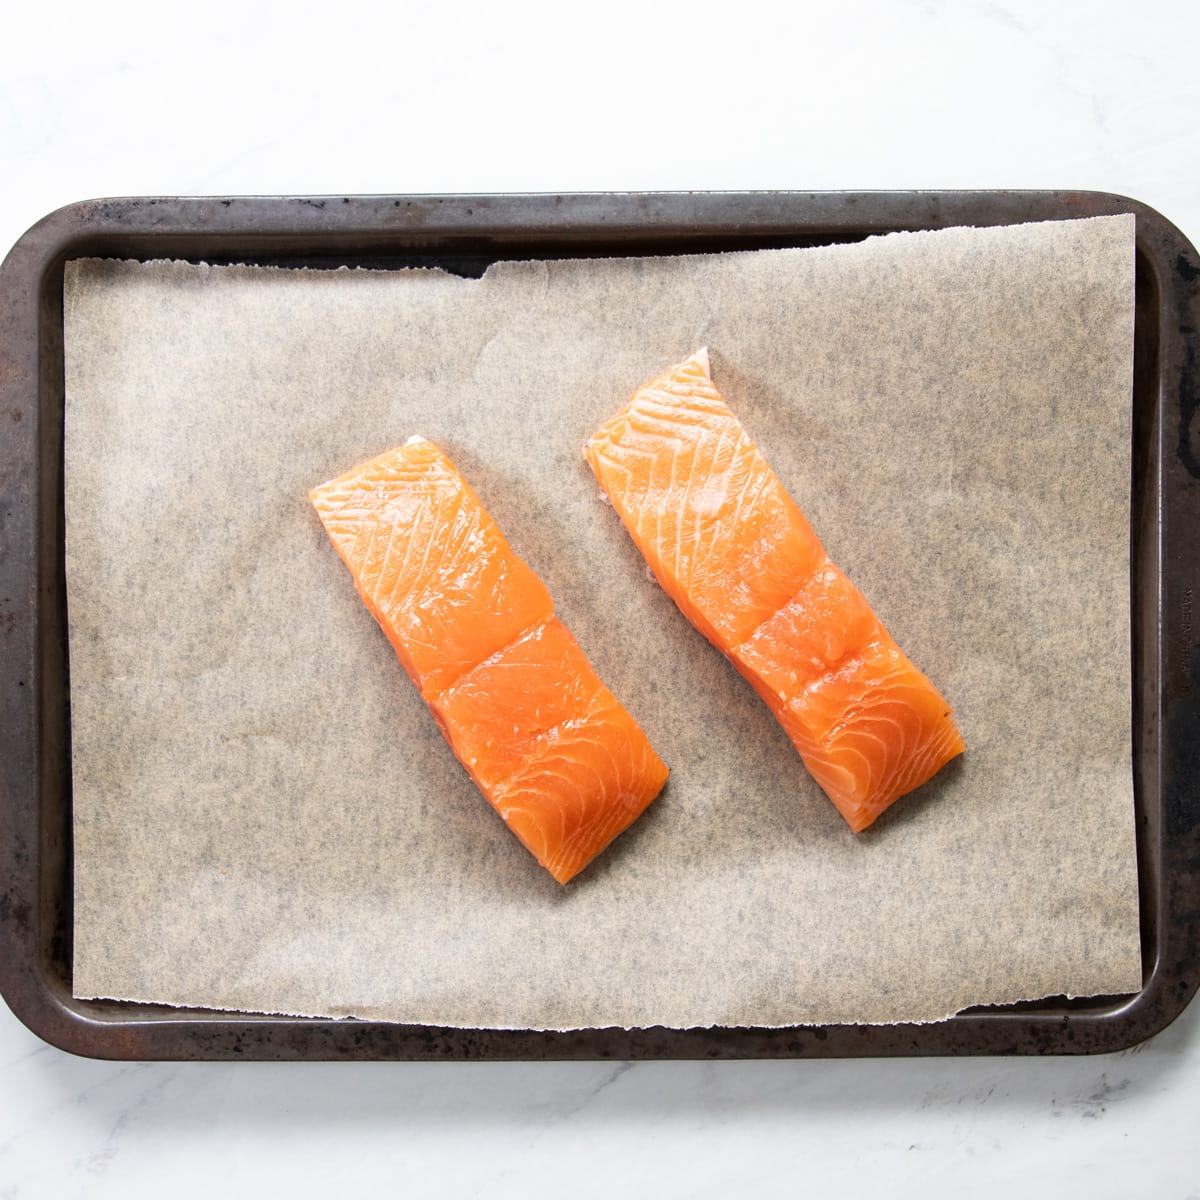 Two raw salmon fillets on a parchment-lined sheet pan.